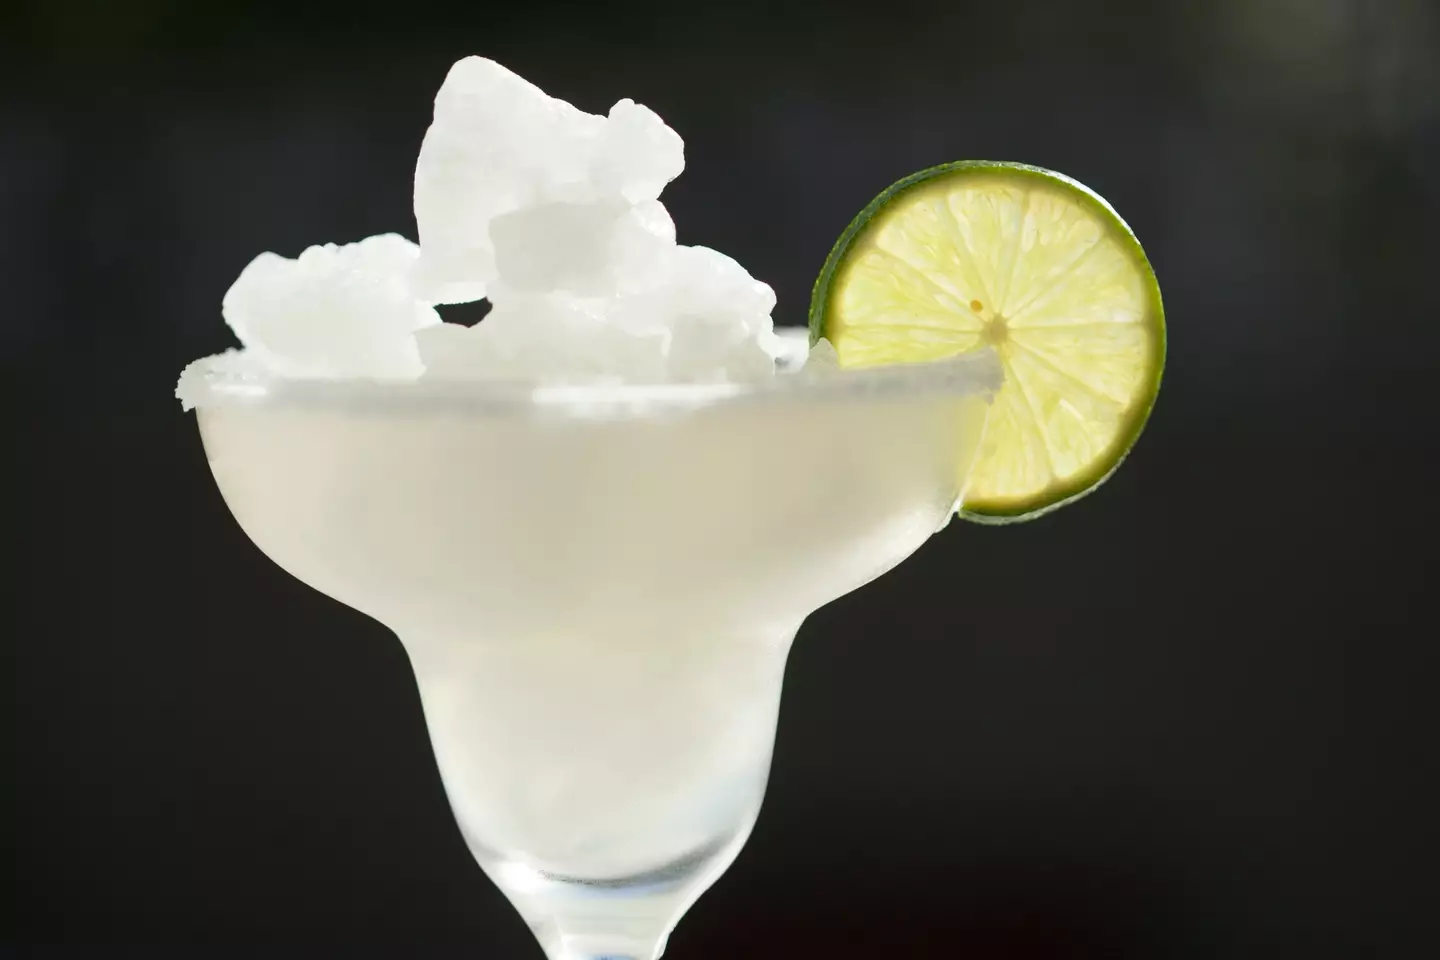 The perfect 'job' for those who think they're a margarita know-it-all.